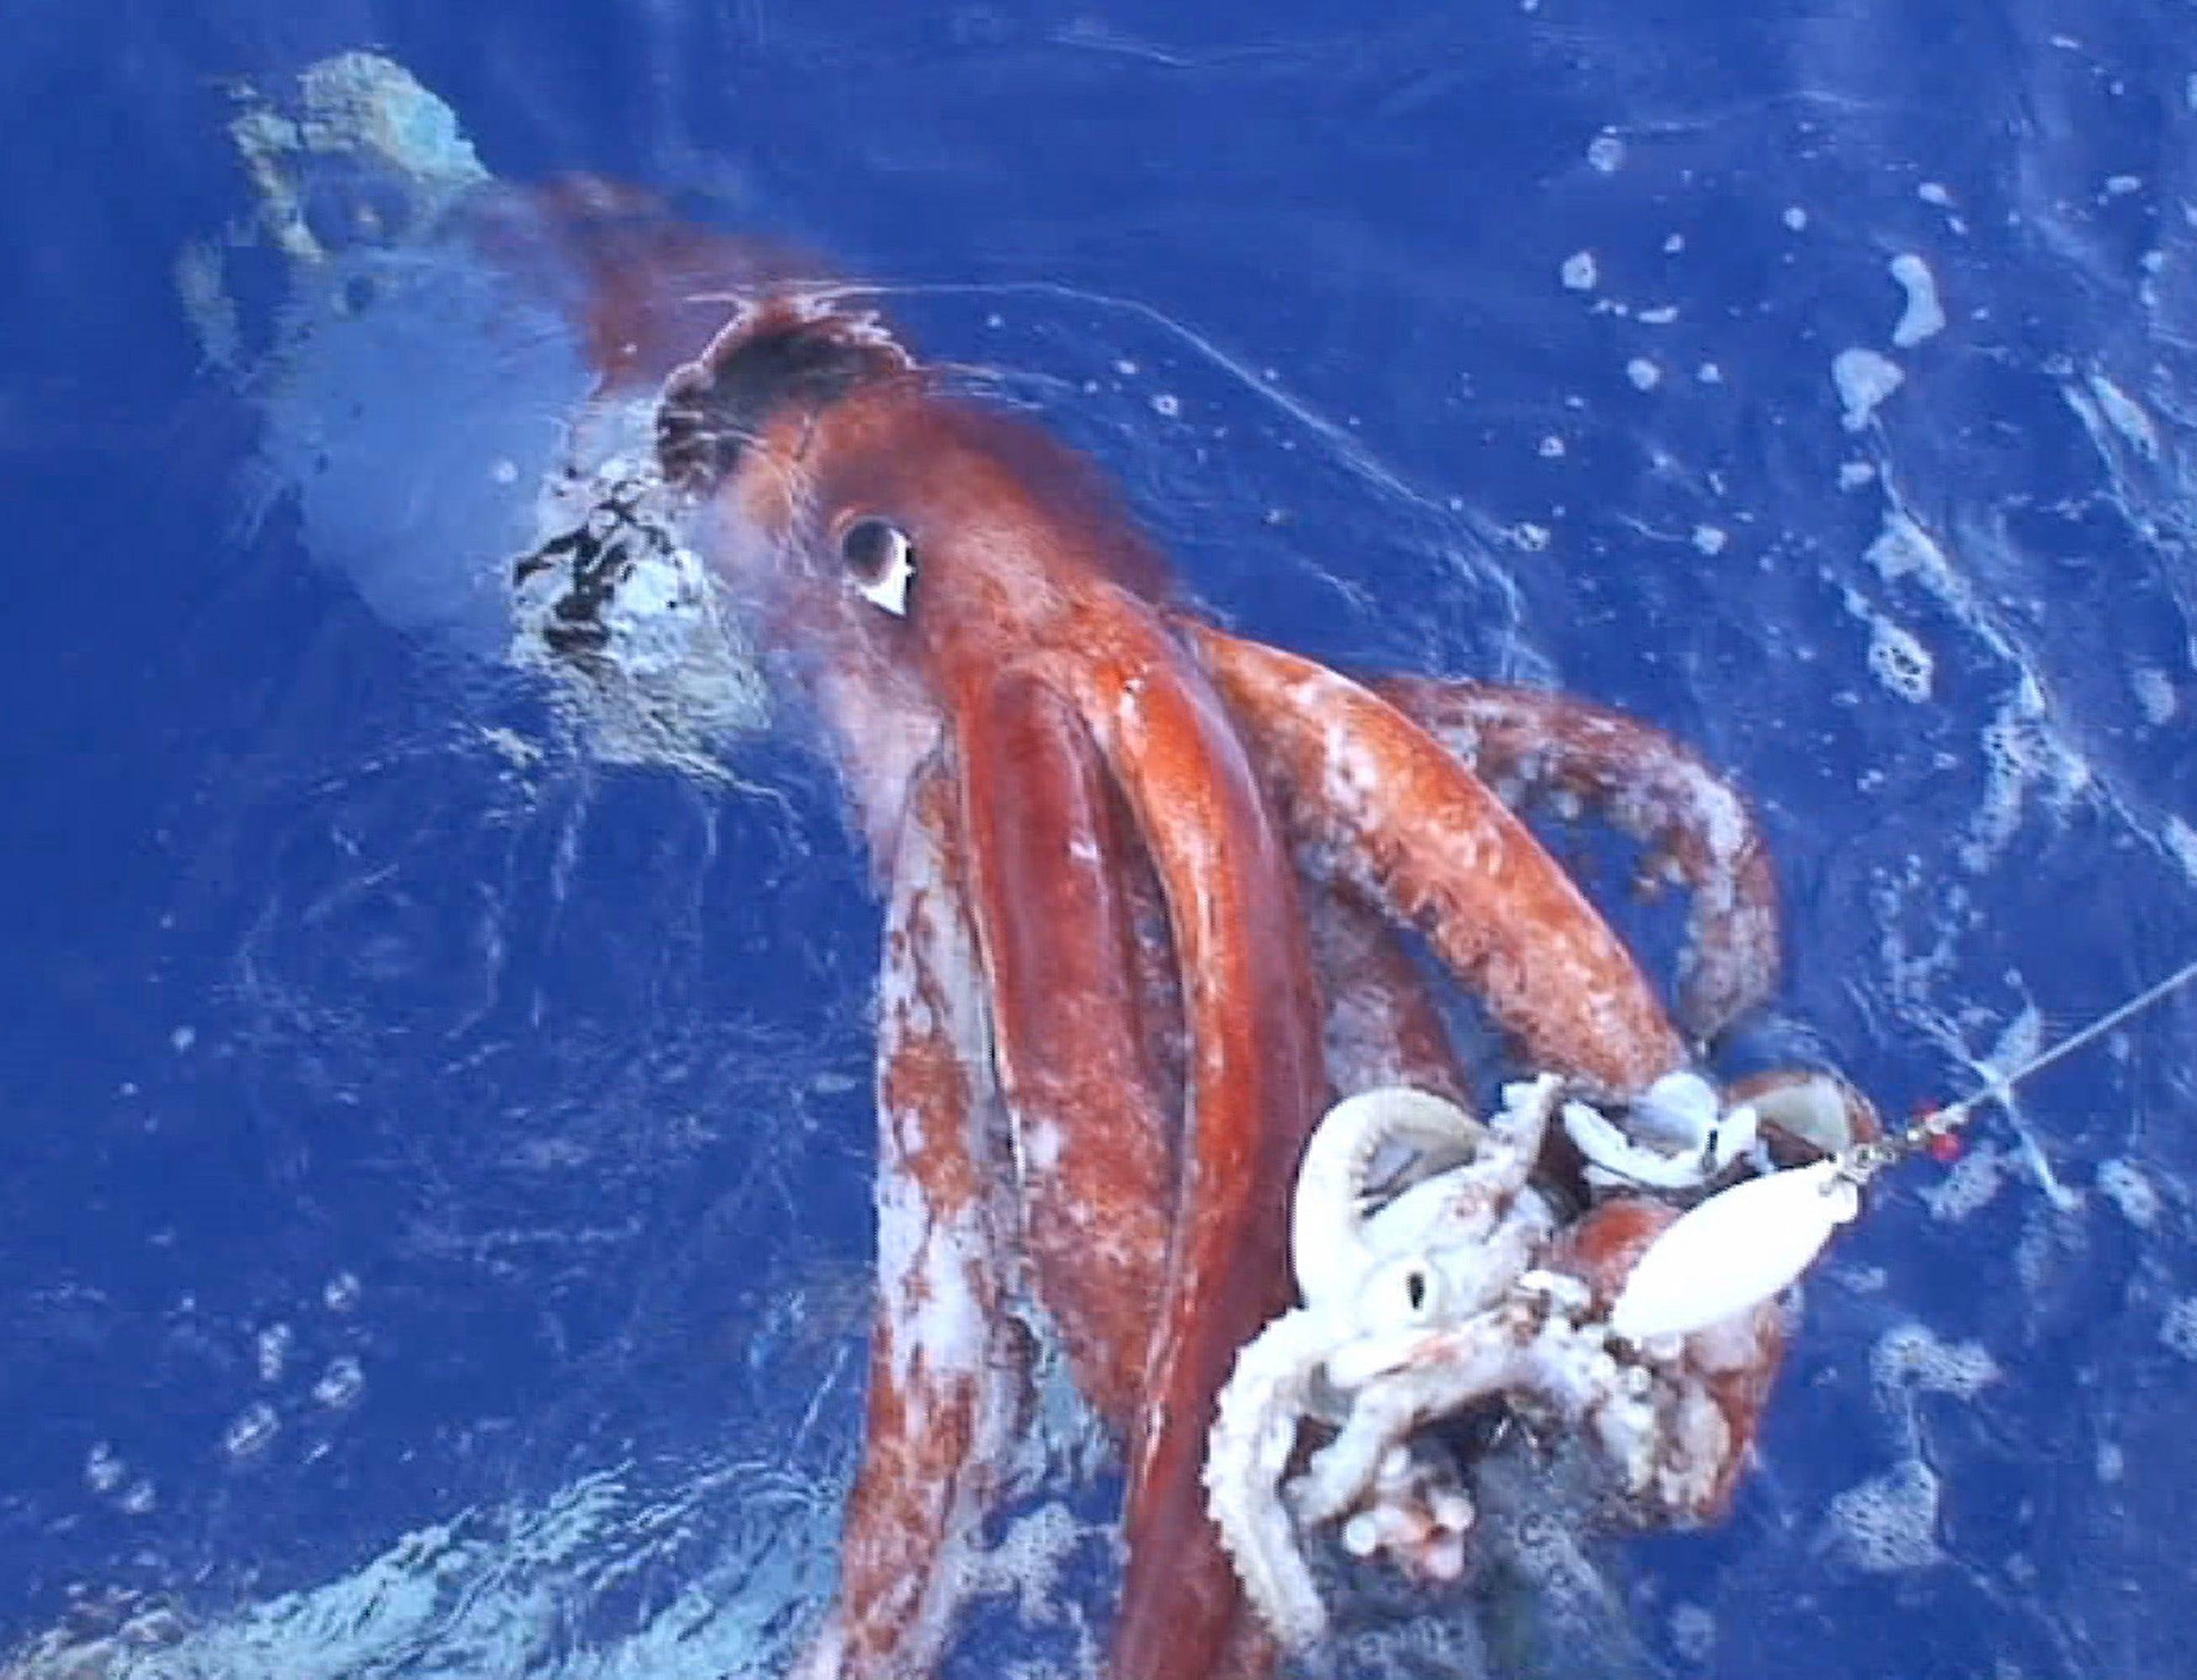 Photos show a rare, 14foot giant squid that washed ashore in South